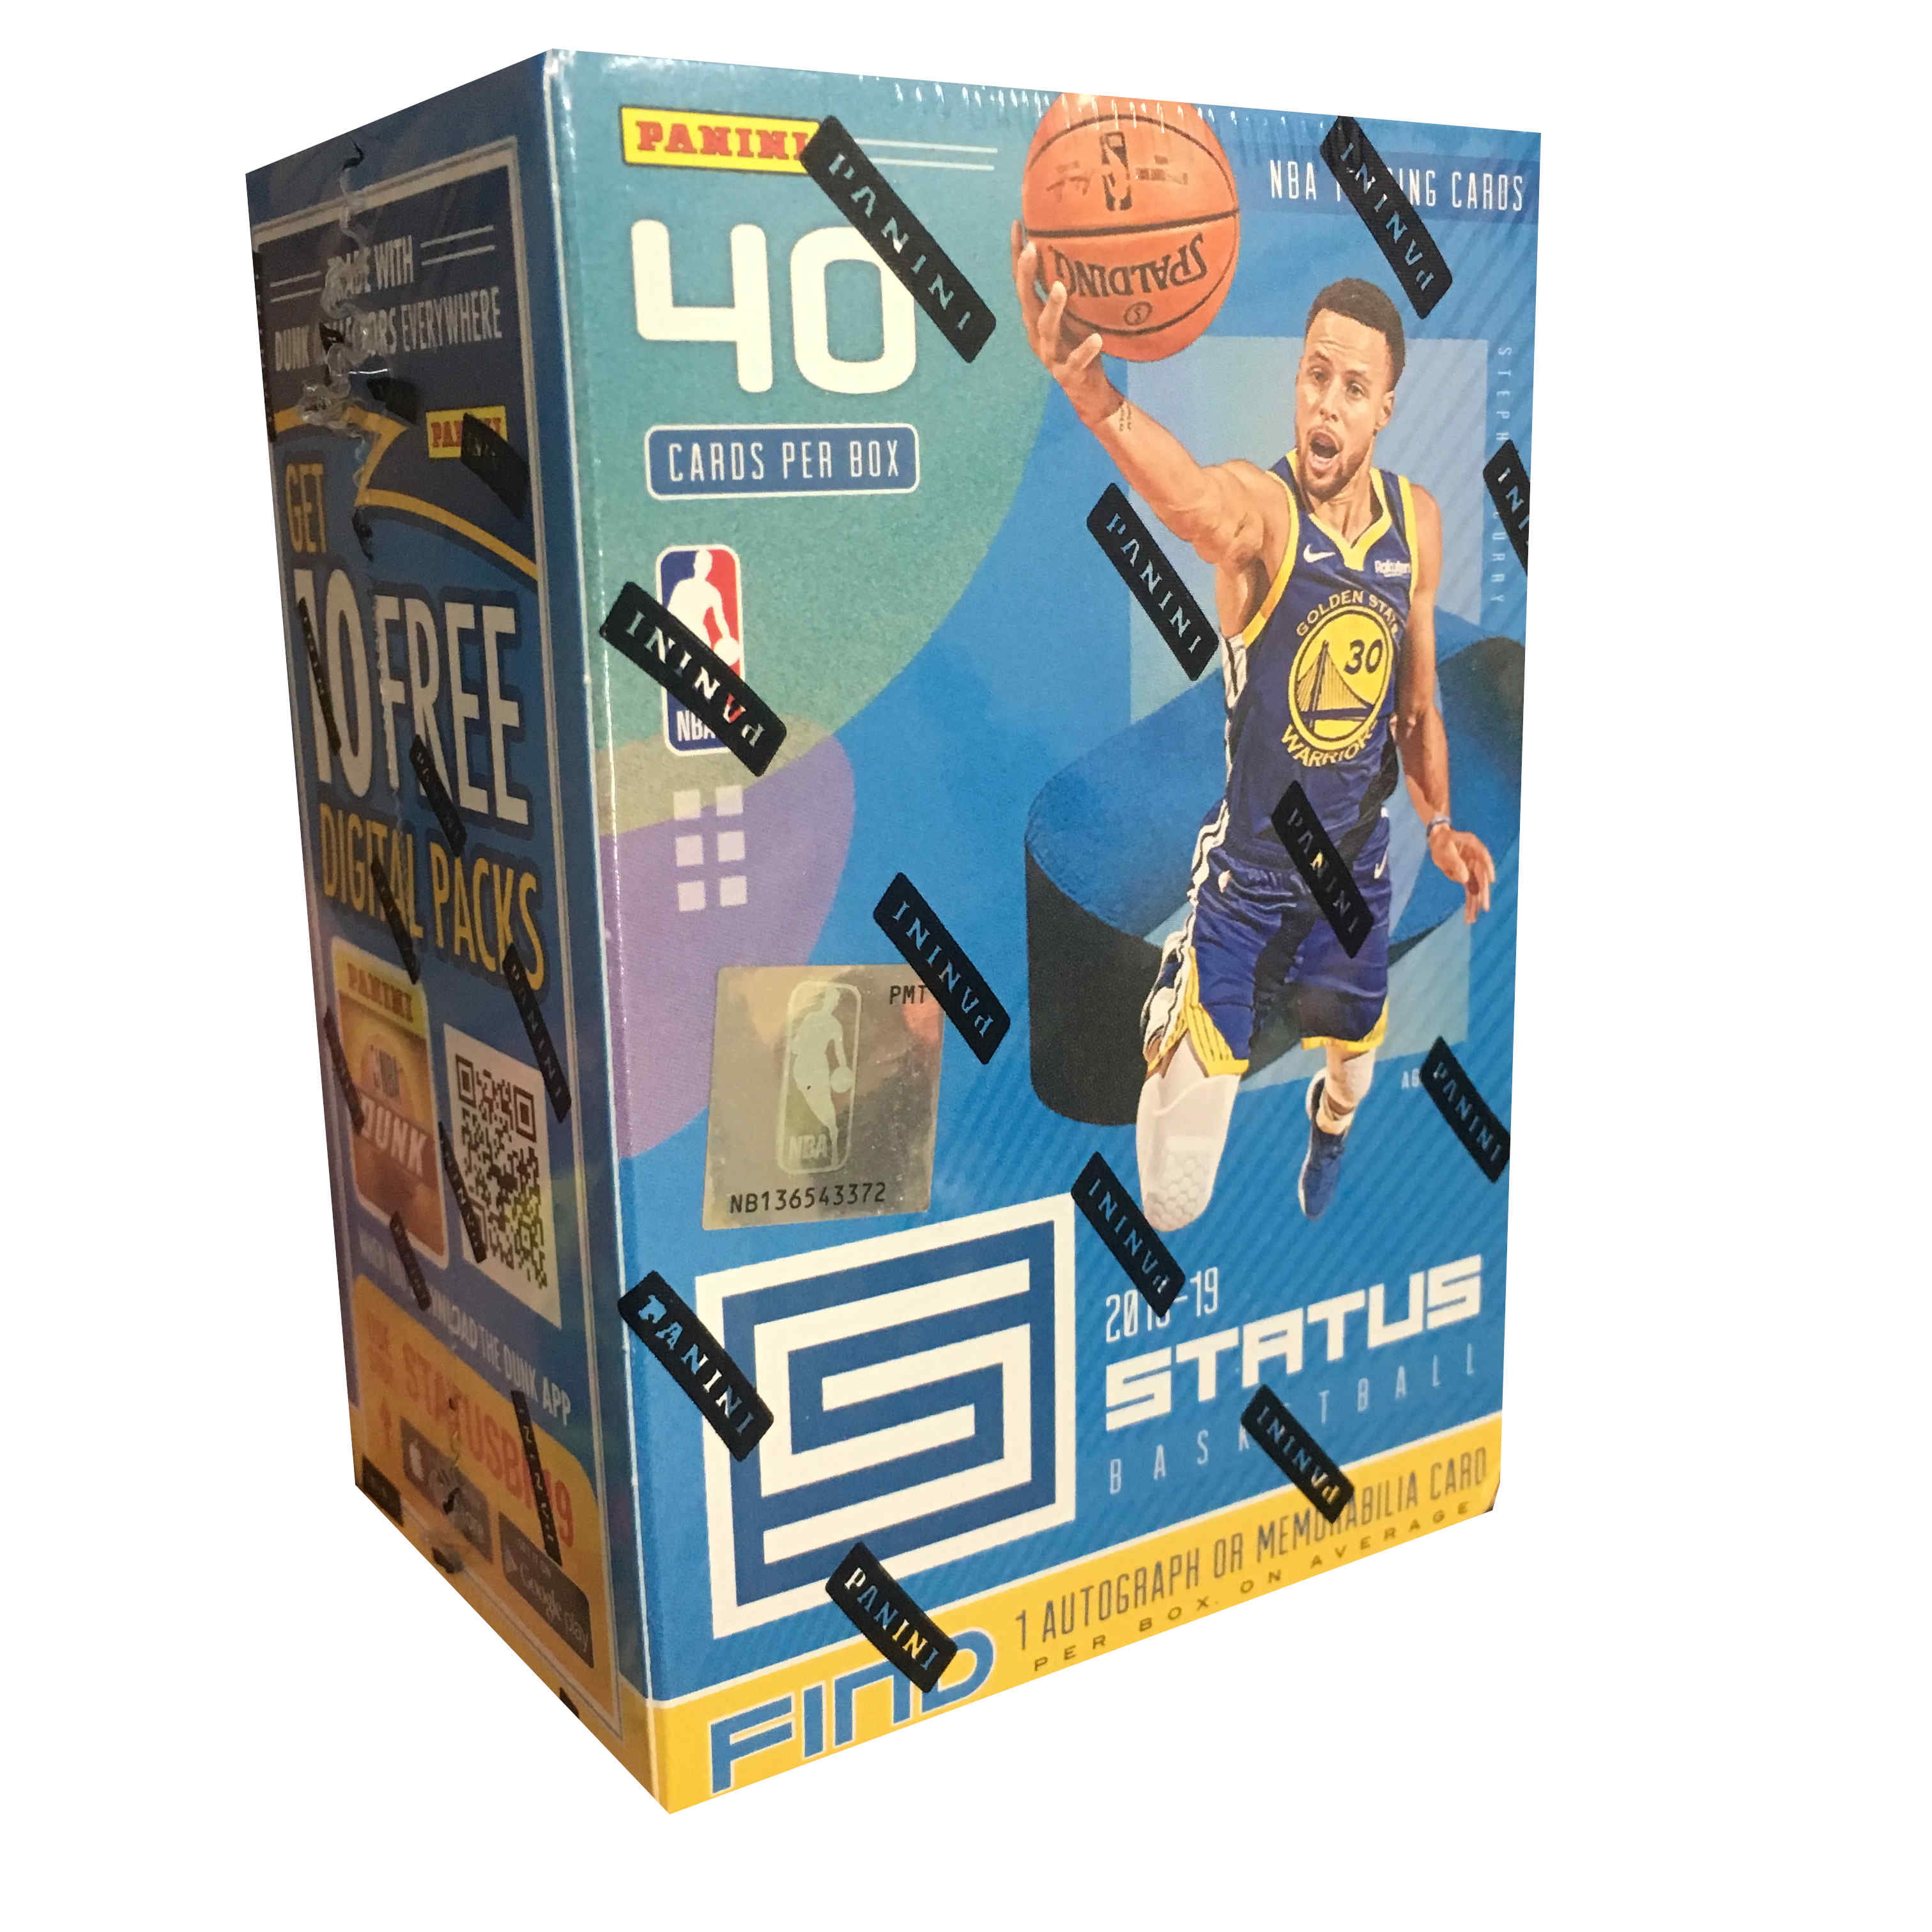 2018-19 Panini Status NBA Basketball Trading Cards Blaster Box- Featuring Steph Curry and Top ...